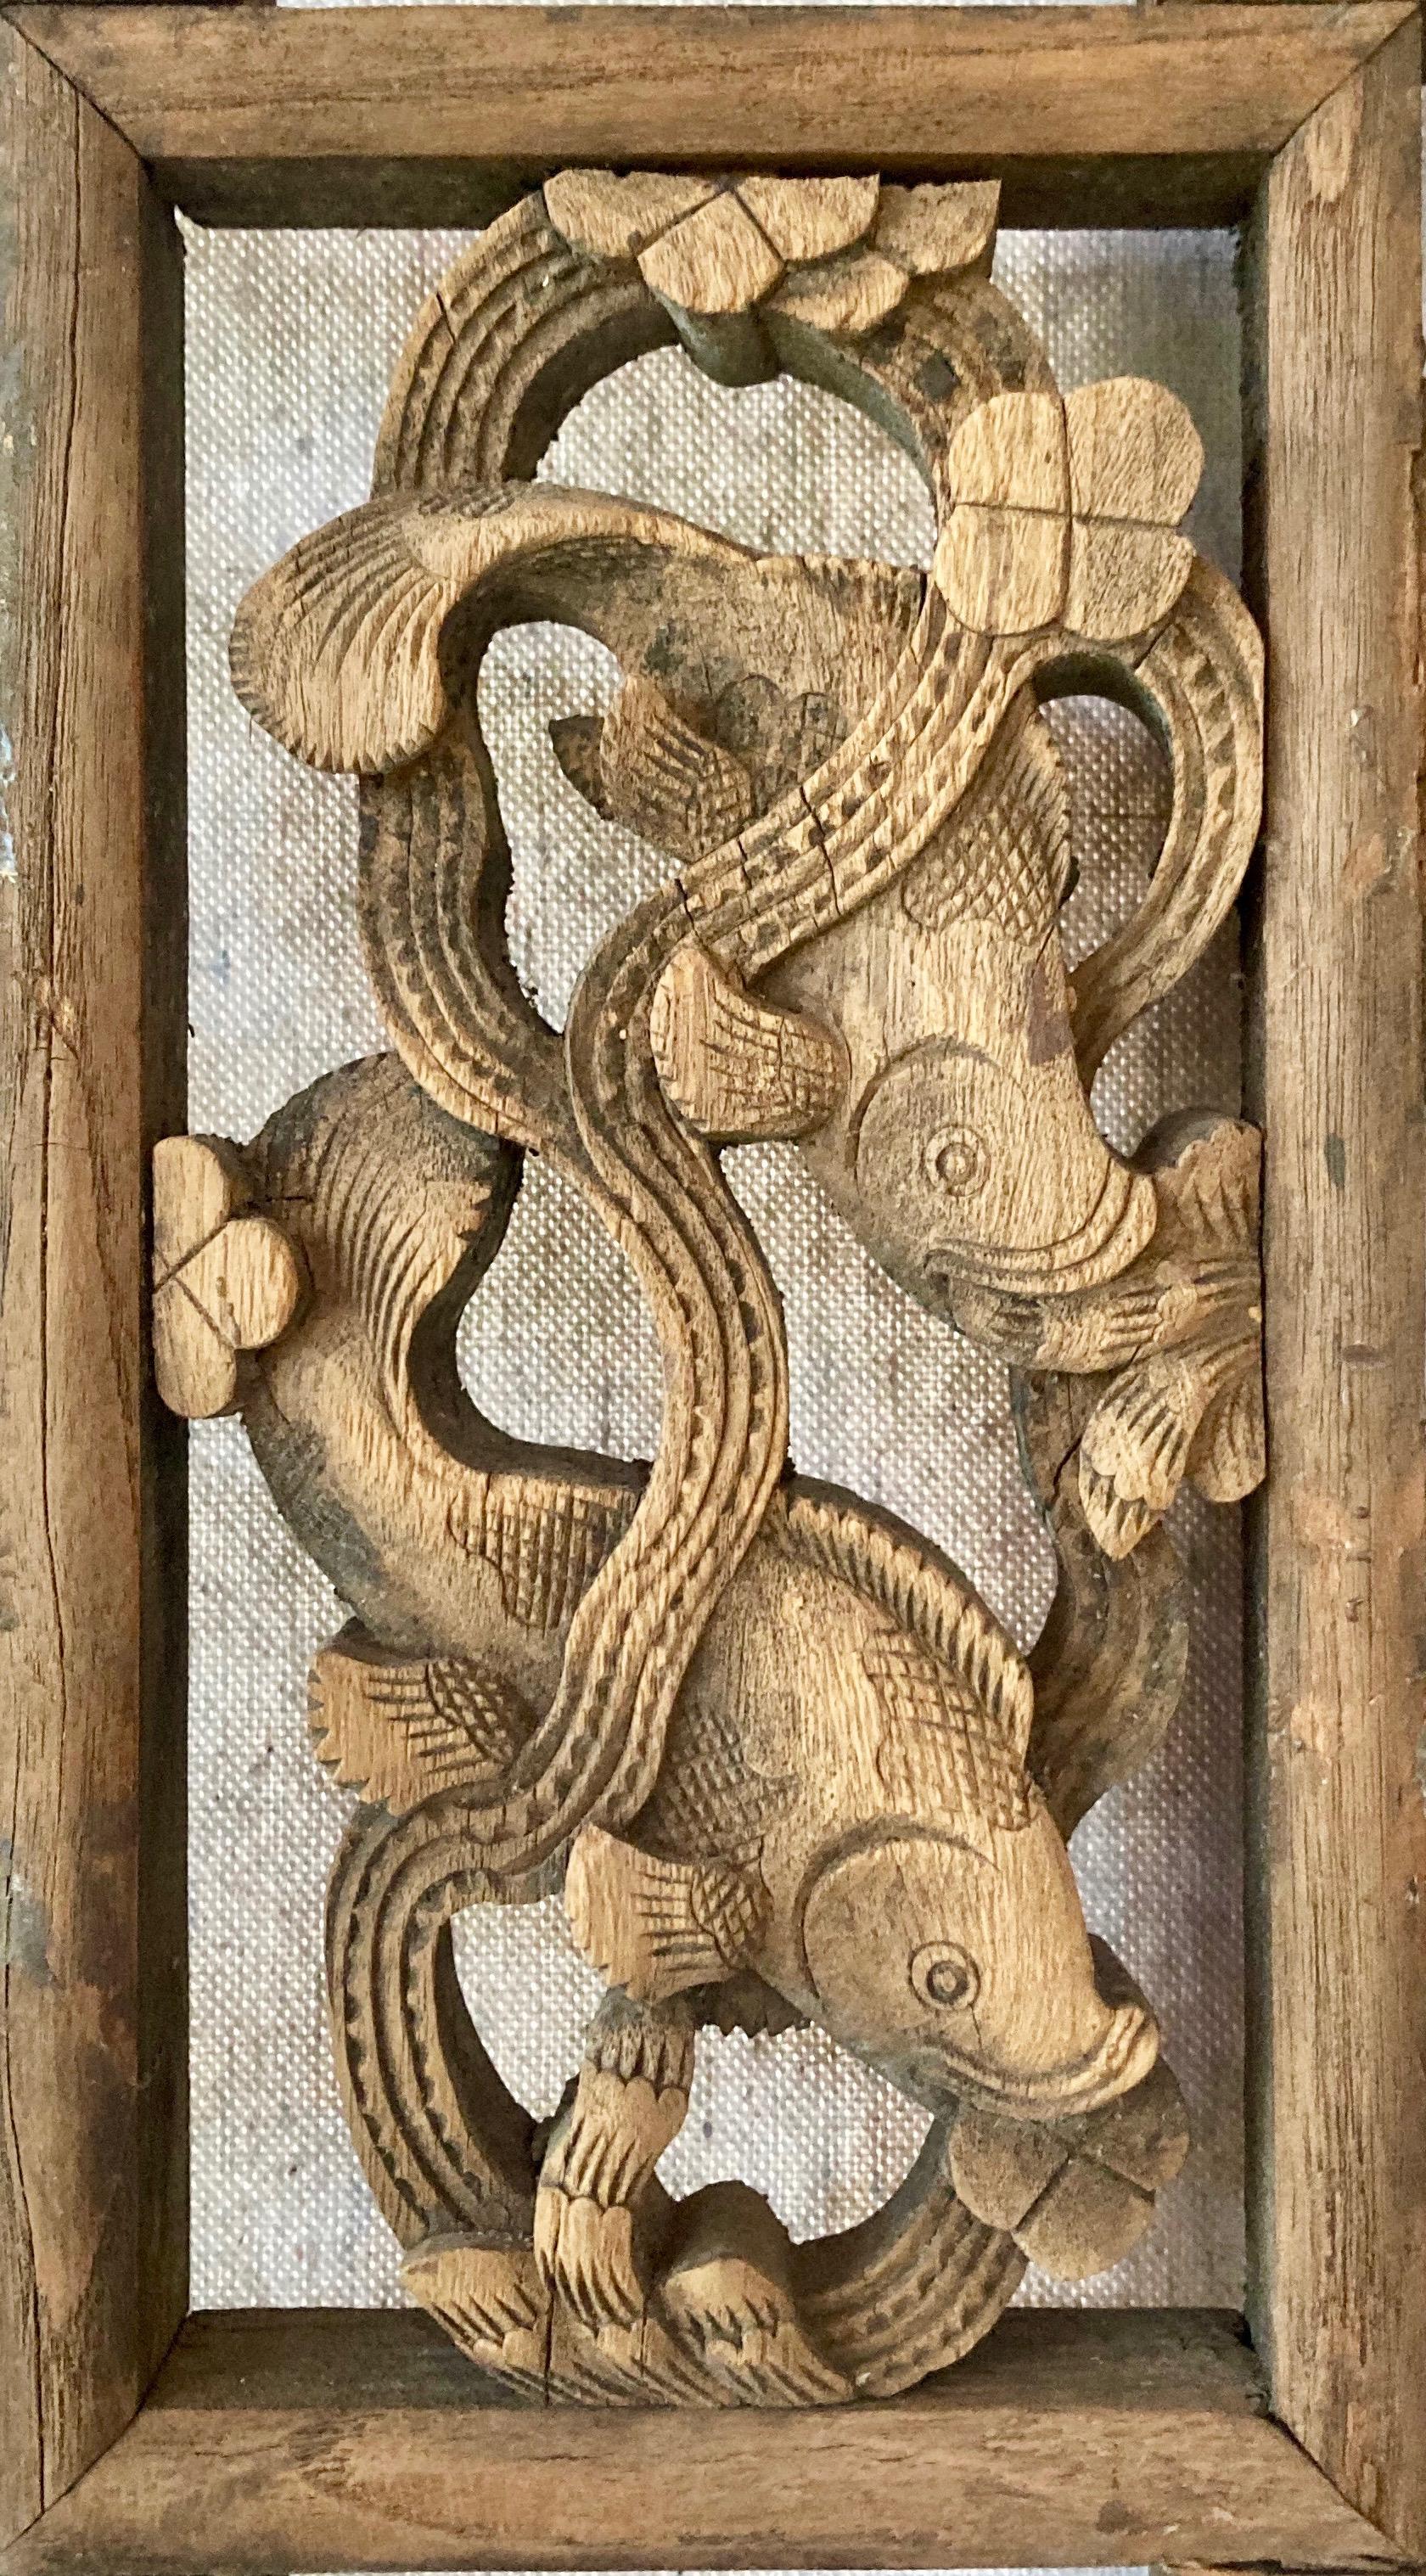 Heavy, thick framed three-pane panel includes openwork carving, relief carving + lattice work techniques. The rectangular center carving includes a pleasant fish motif. The lower pane features personage in a garden.